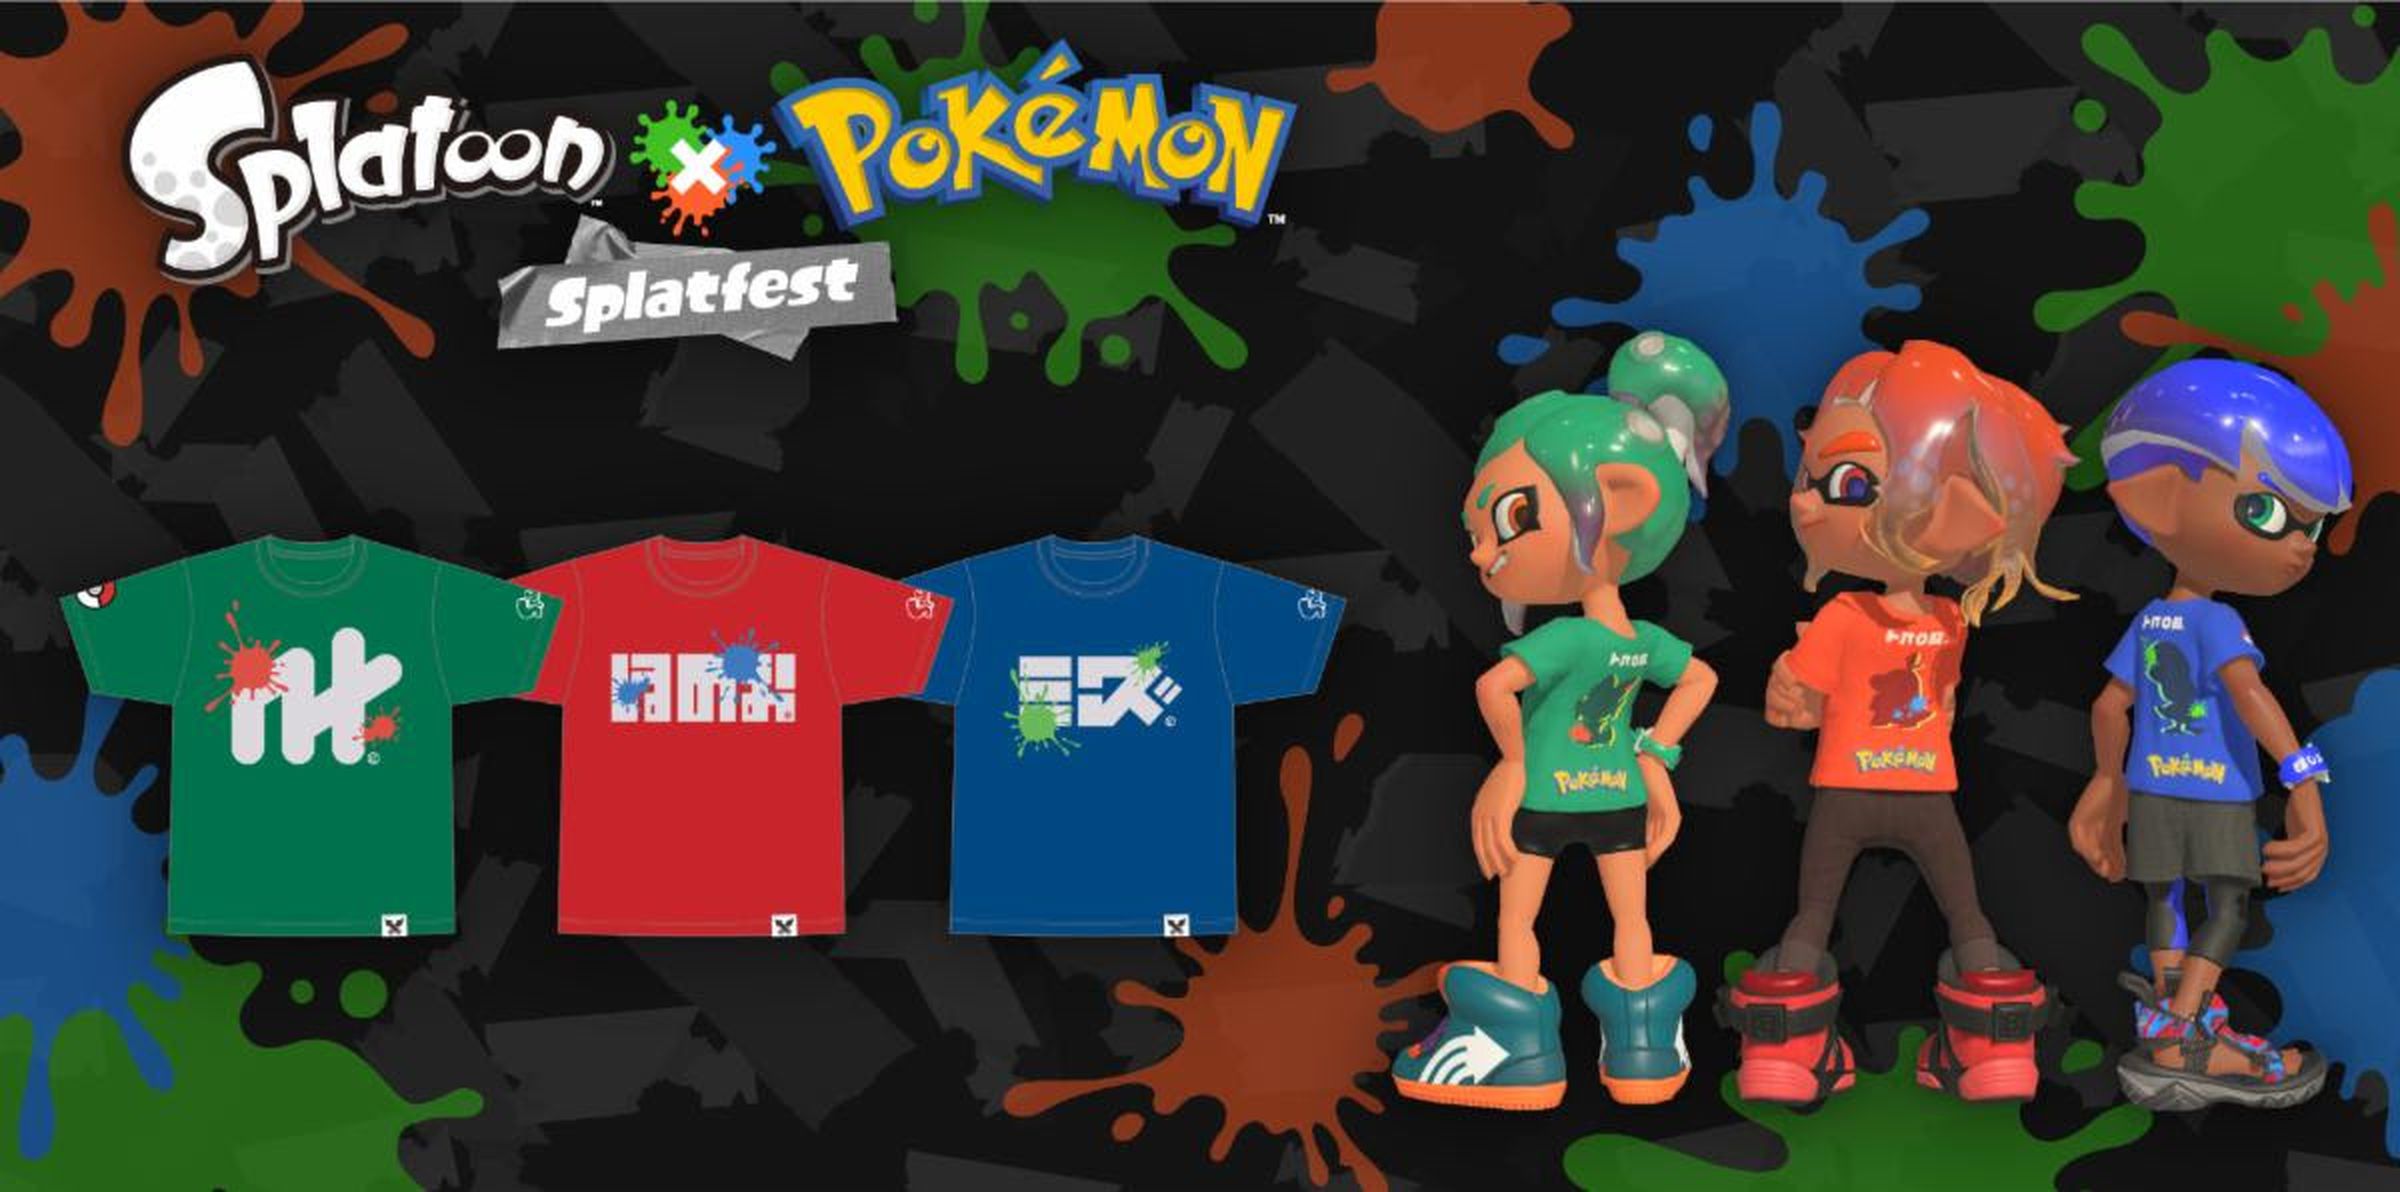 The splatfest shirts for the next event.